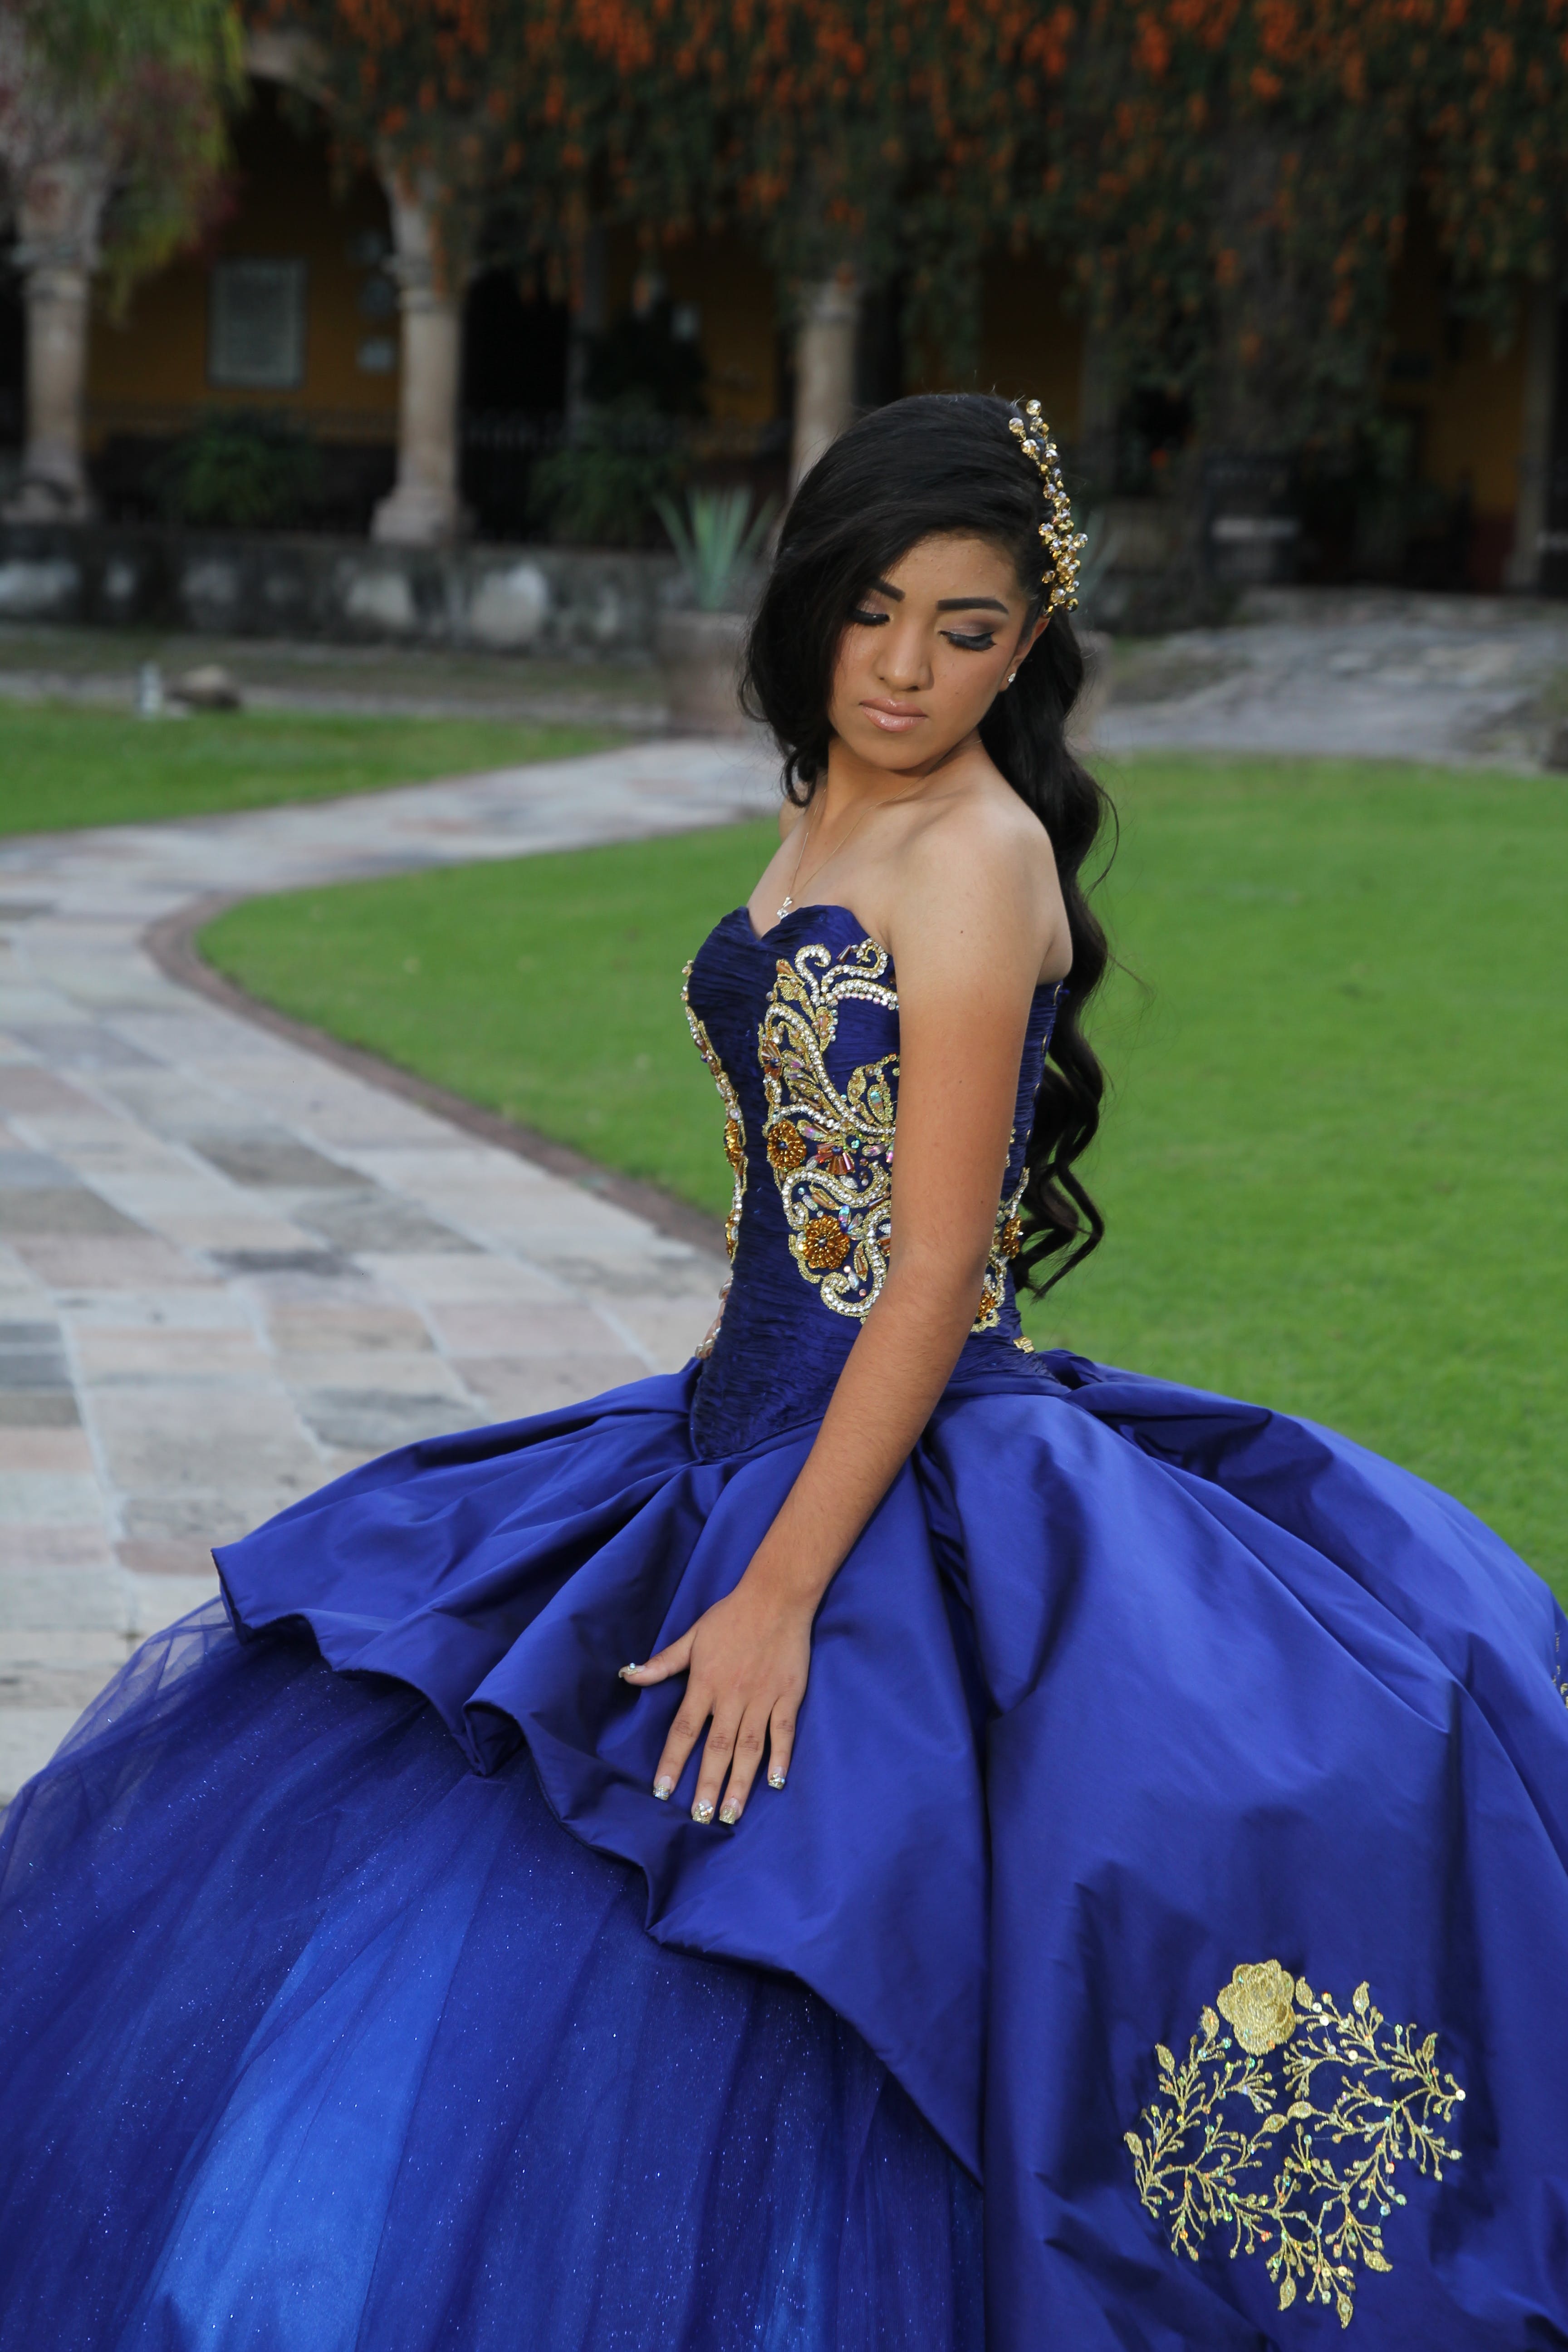 A young woman in a Quinceanera gown | Source: Pexels